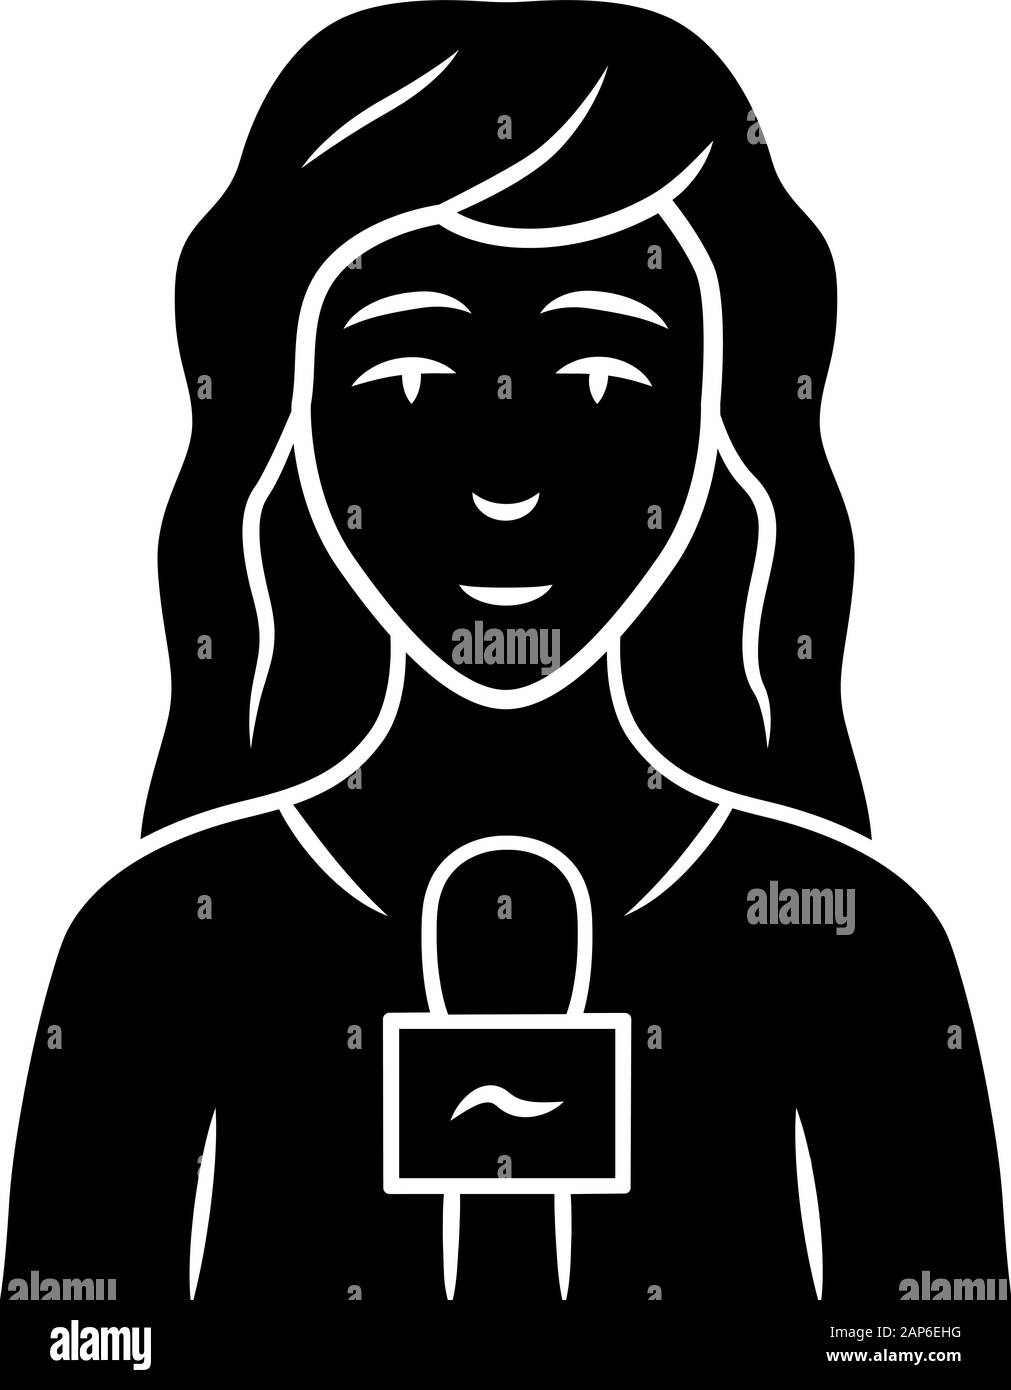 Reporter woman glyph icon. TV presenter, interviewer with microphone. Female journalist taking interview. Newswoman reporting news. Silhouette symbol. Stock Vector